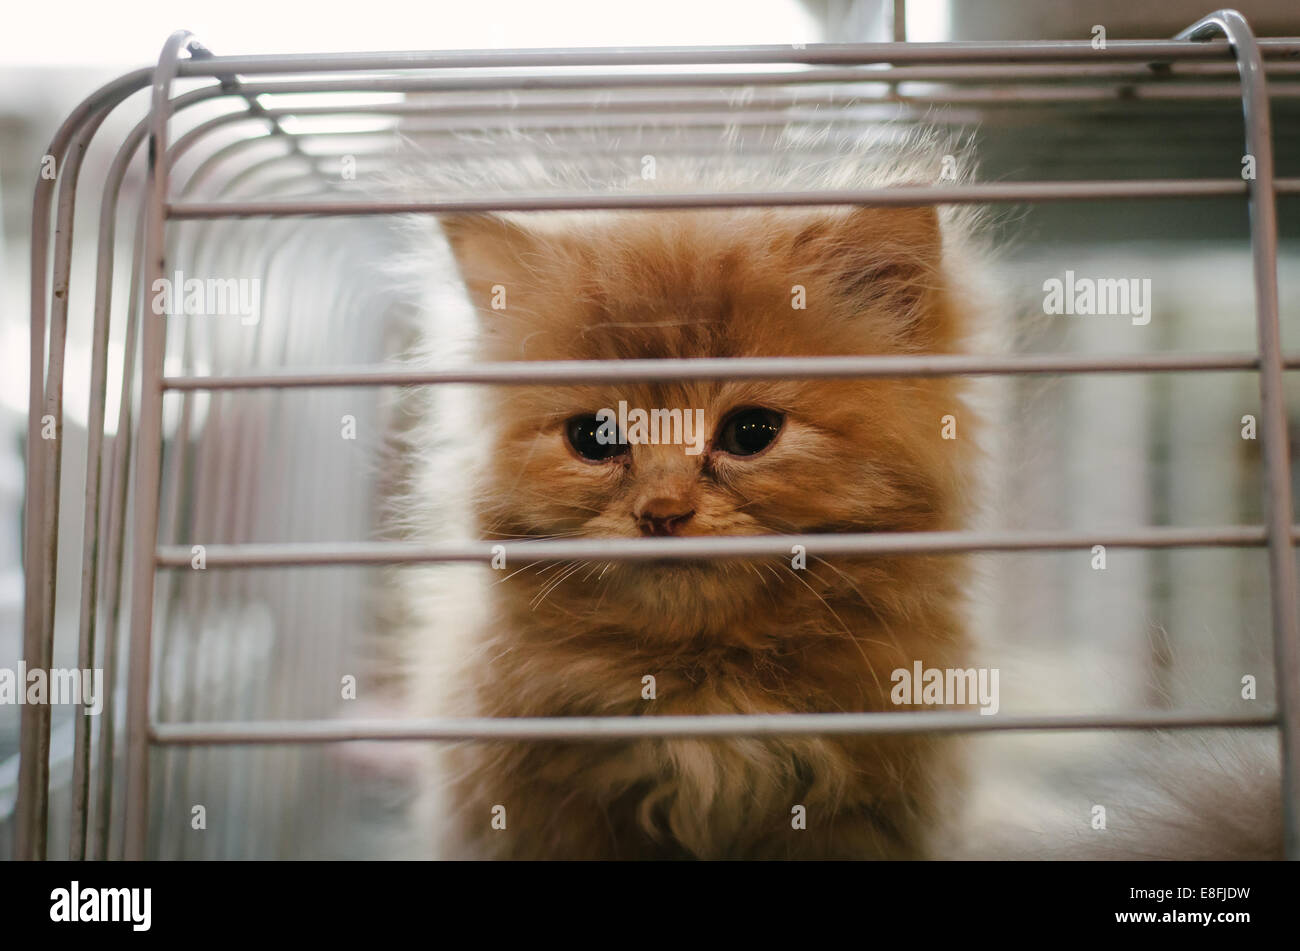 Kitten in a metal cage Stock Photo